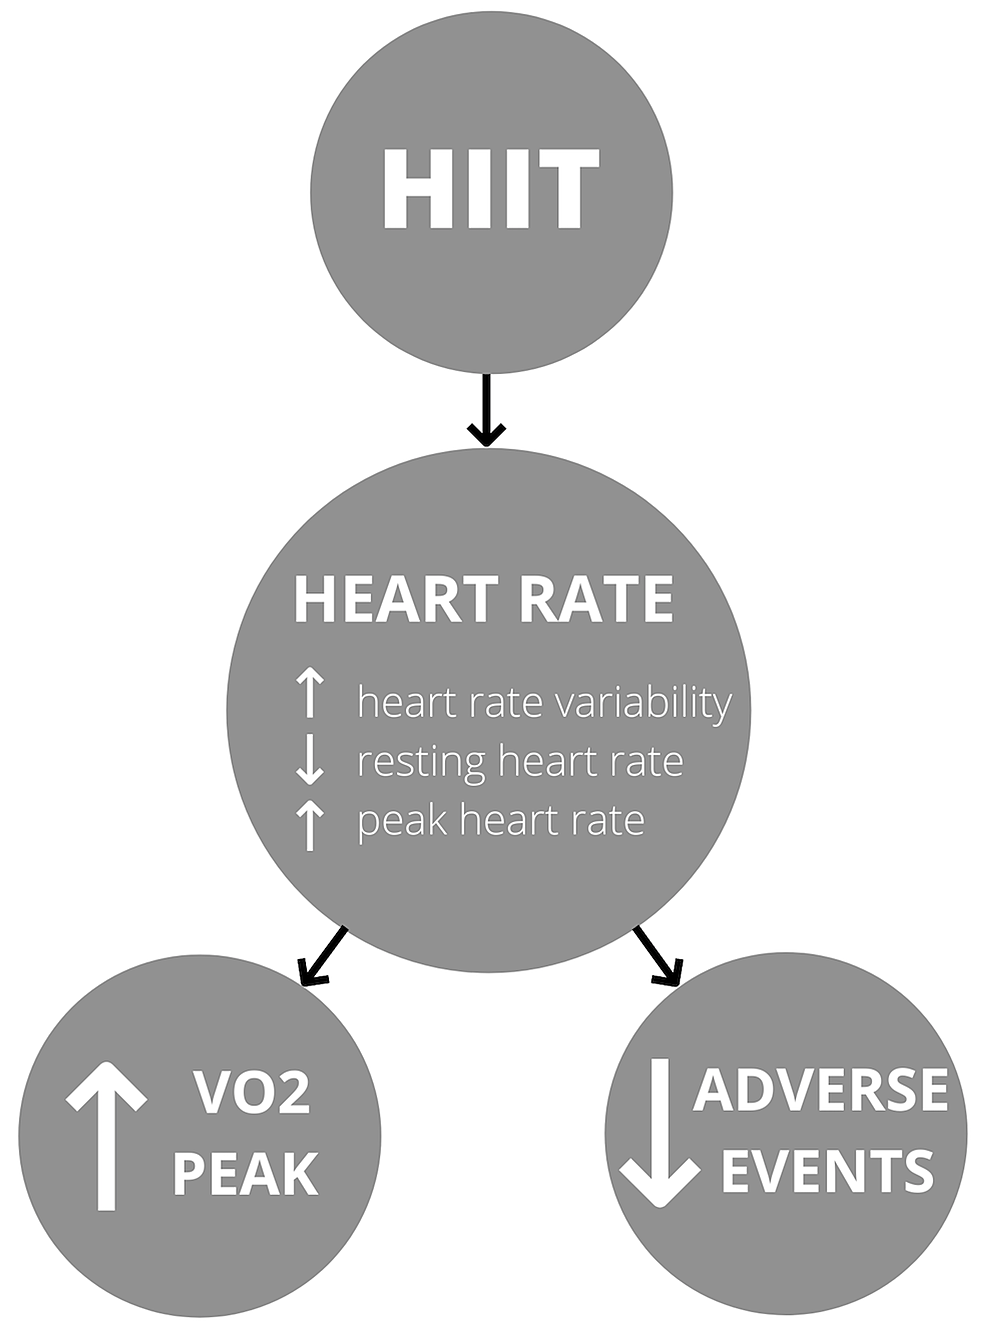 Effects-of-high-intensity-interval-training-on-heart-rate-and-Its-effects-on-VO2-peak-and-adverse-events